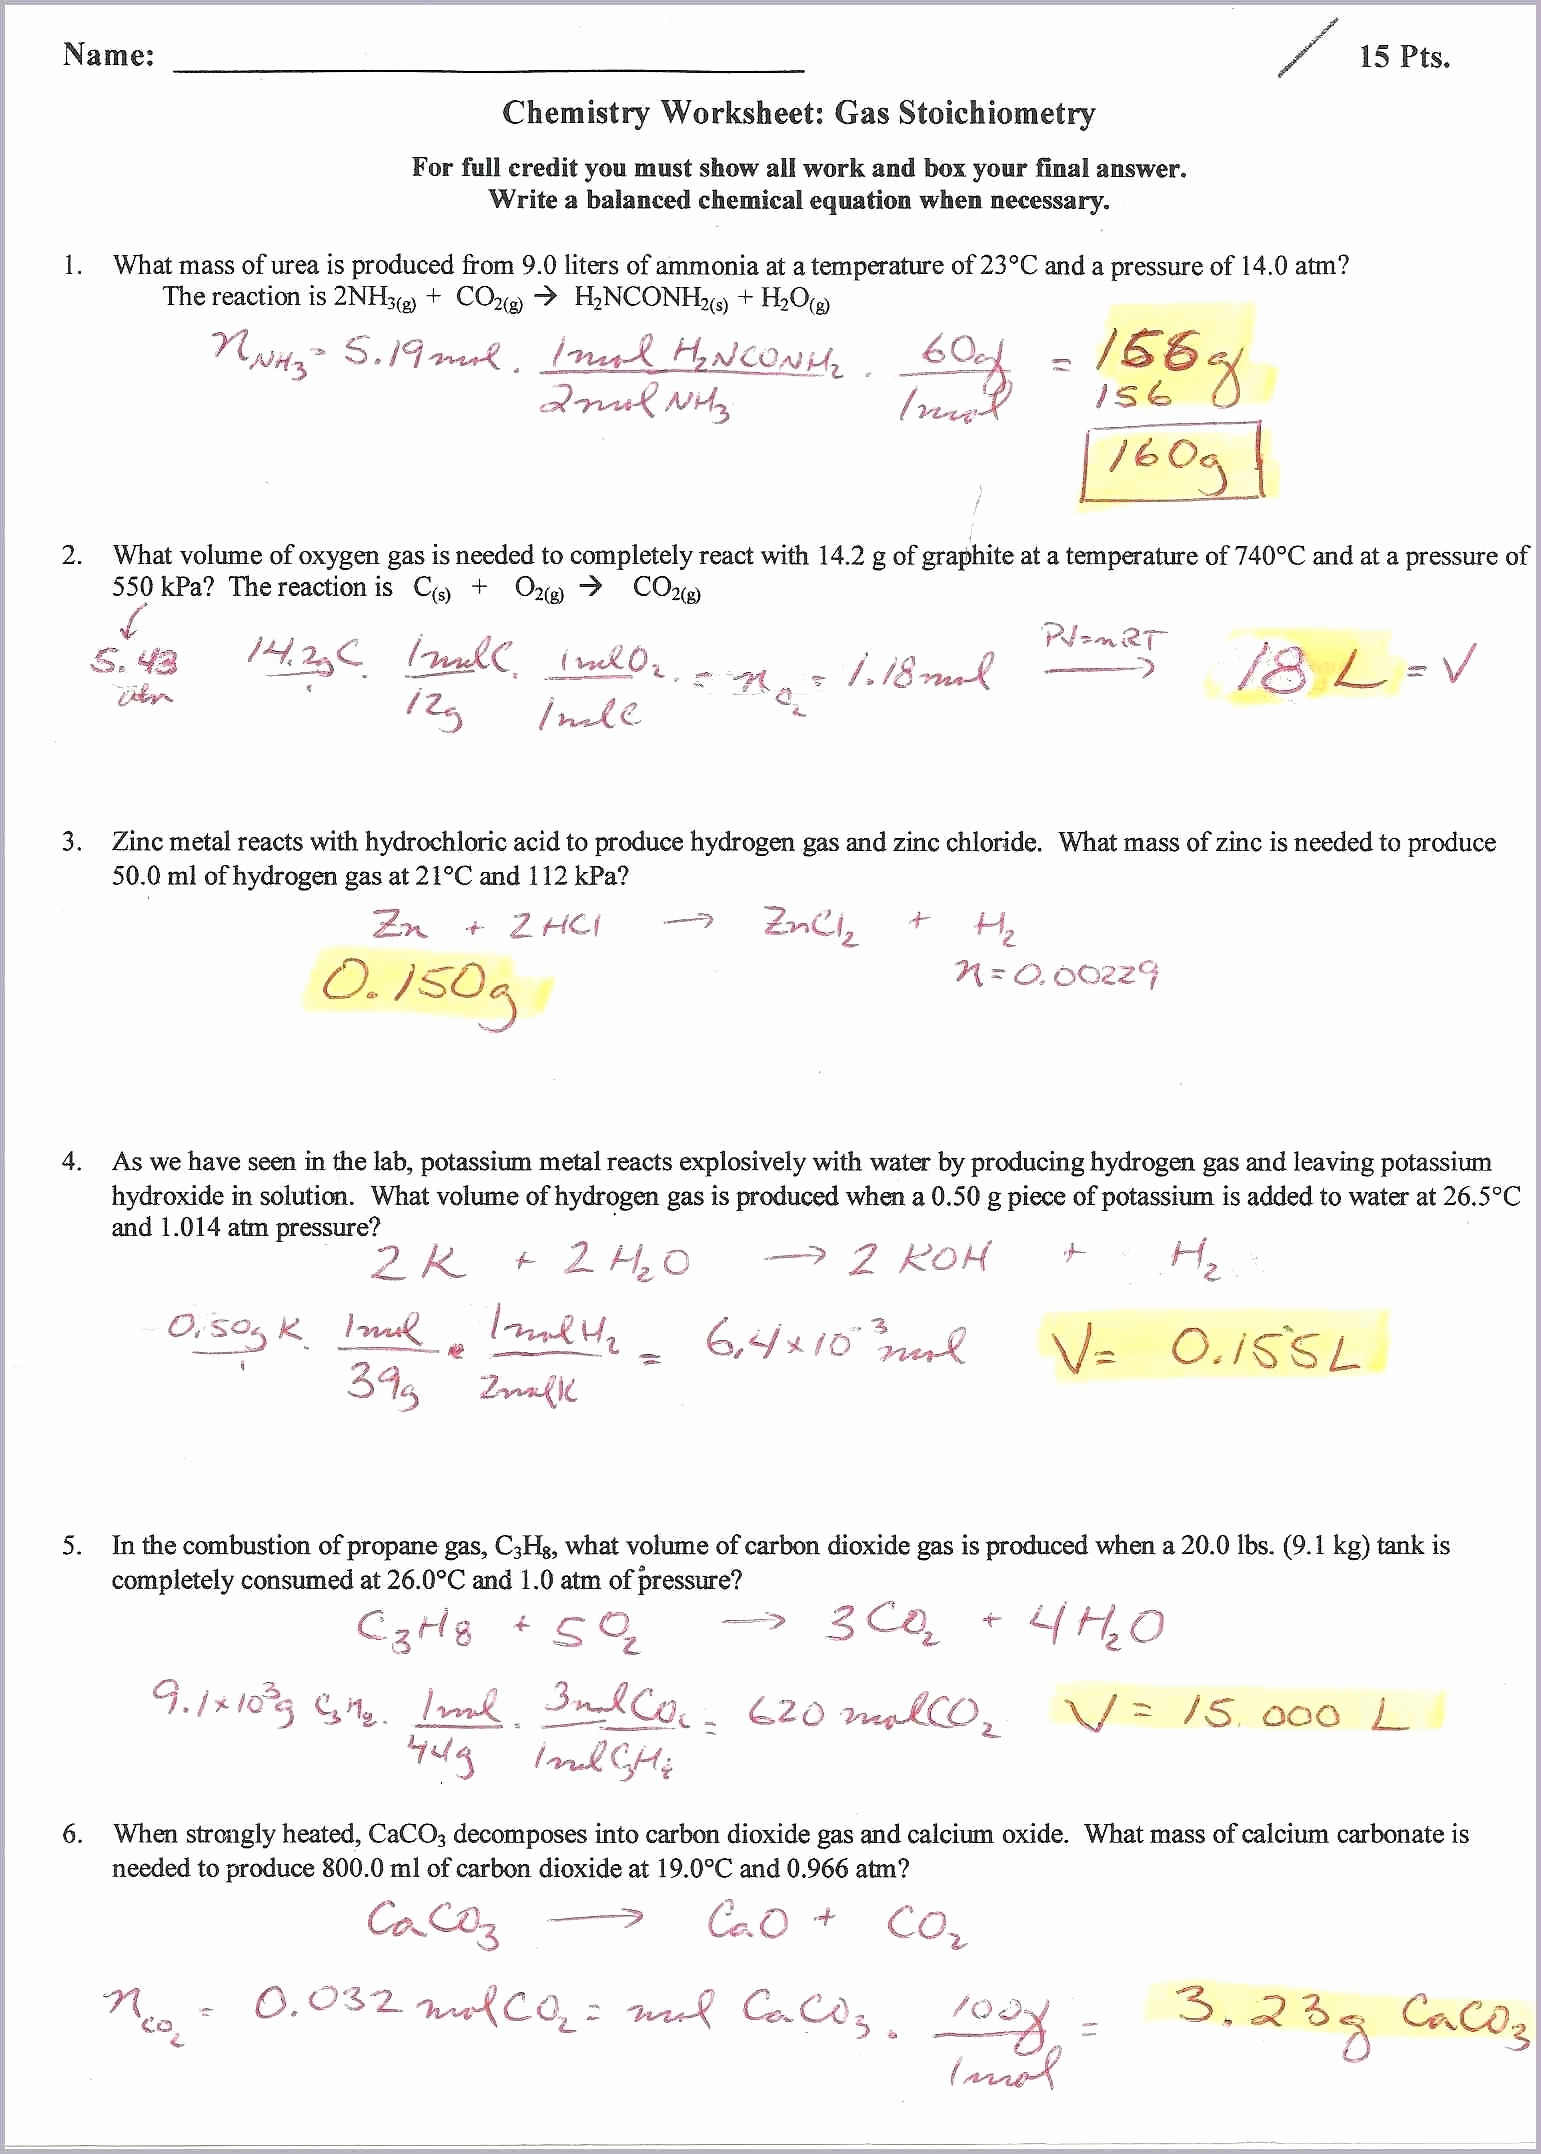 gas-stoichiometry-worksheet-with-solutions-db-excel